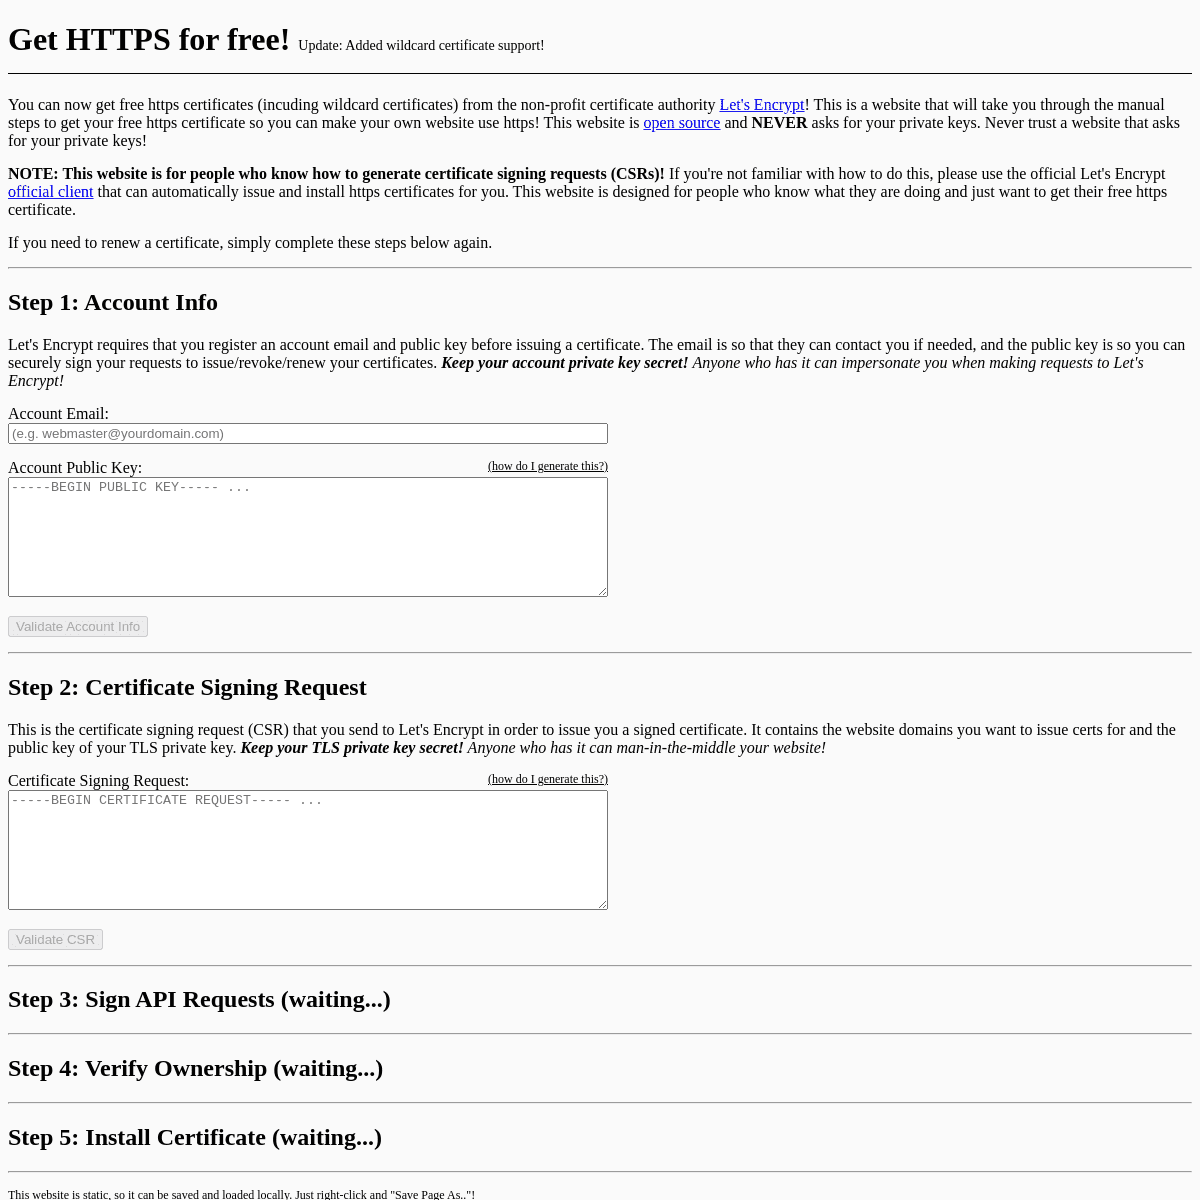 A complete backup of https://gethttpsforfree.com